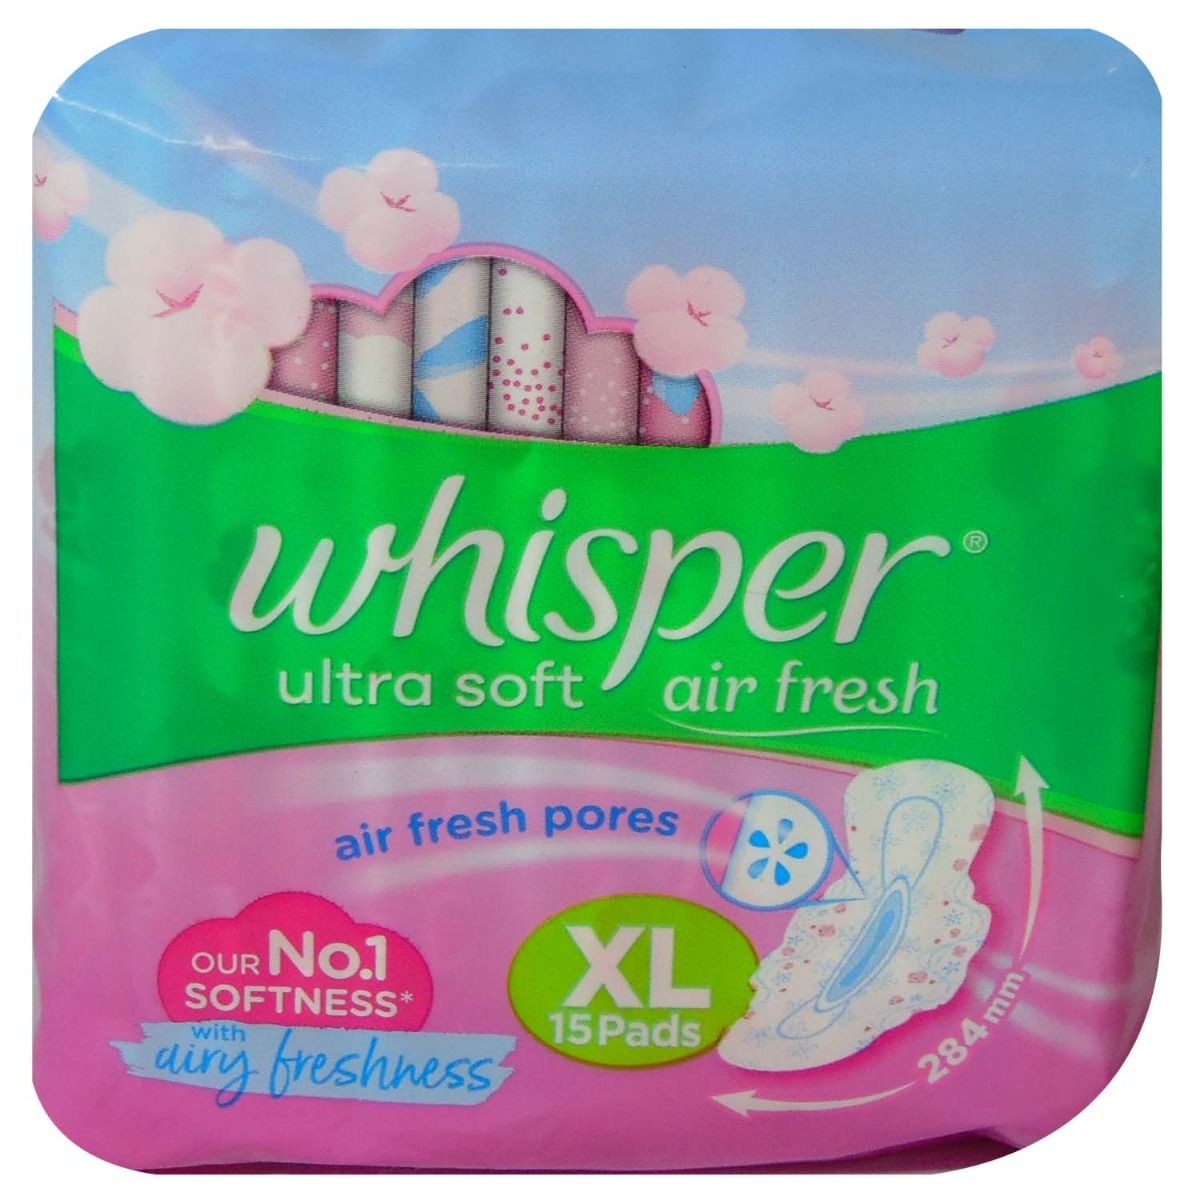 Whisper Ultra Soft 2x Softer Wings Sanitary Pads XL, 15 Count, Pack of 1 